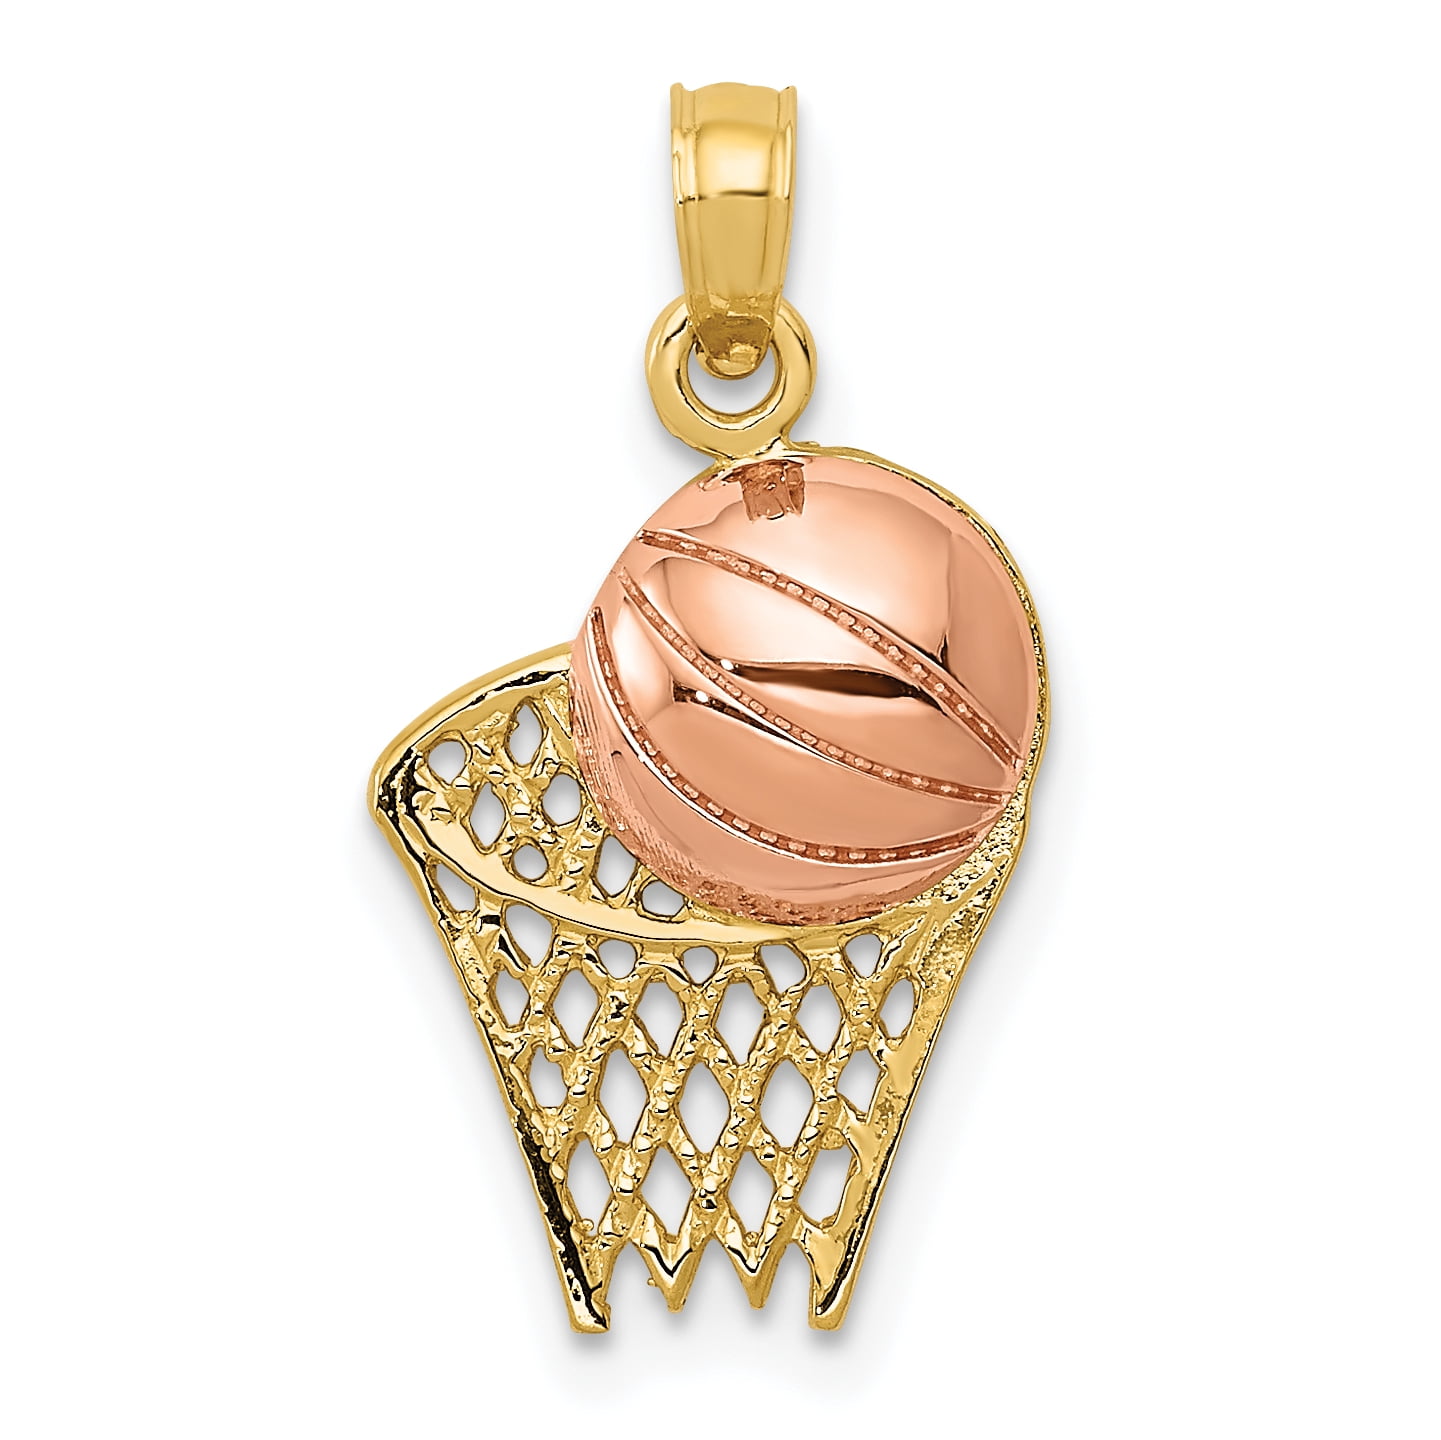 10k Yellow Gold Basketball Net Pendant Charm Necklace Sport Fine Jewelry Gifts For Women For Her 